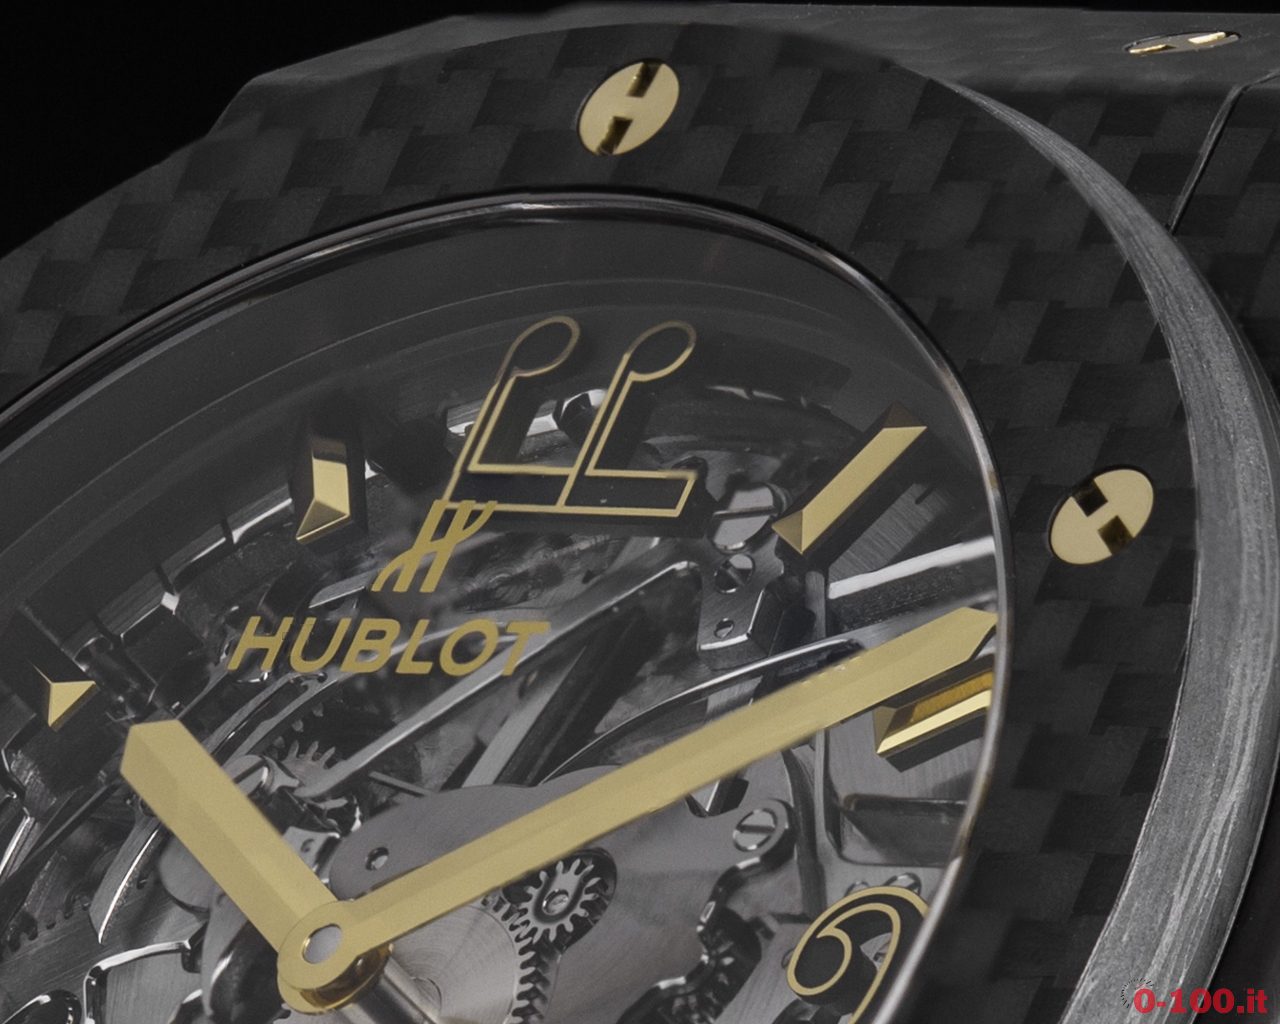 hublot-classic-fusion-tourbillon-cathedral-minute-repeater-carbon-lang-lang-limited-edition-ref-504-qx-0180-vr-lal16-prezzo-price_0-1008